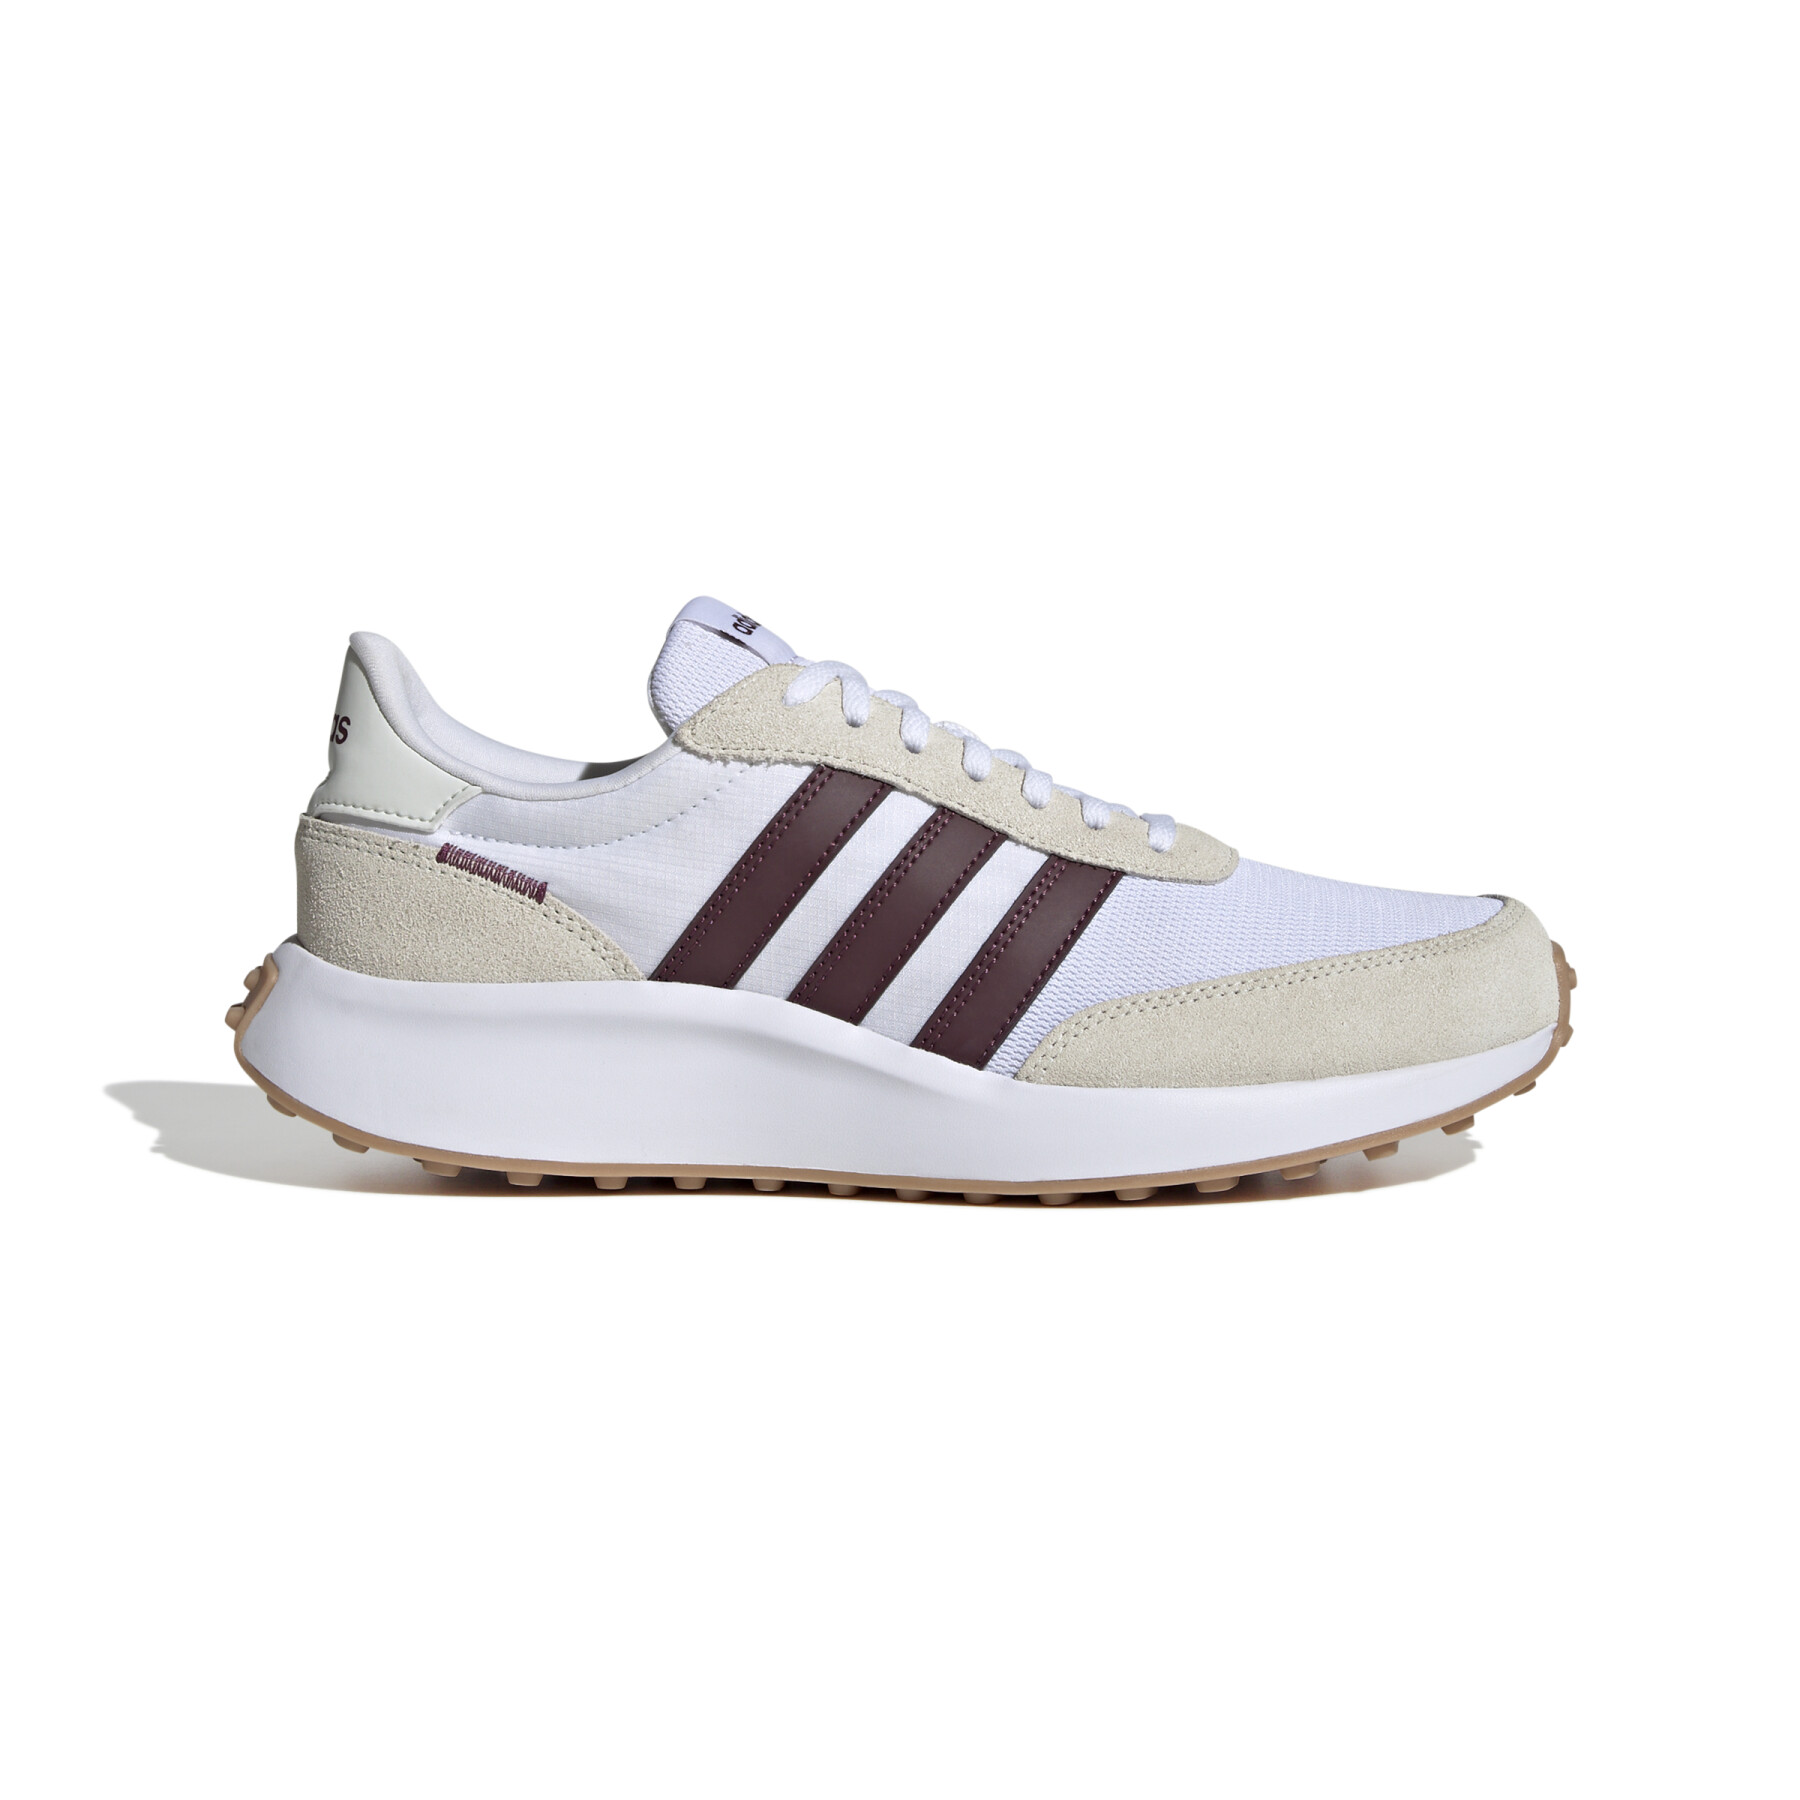 Running shoes adidas 70s